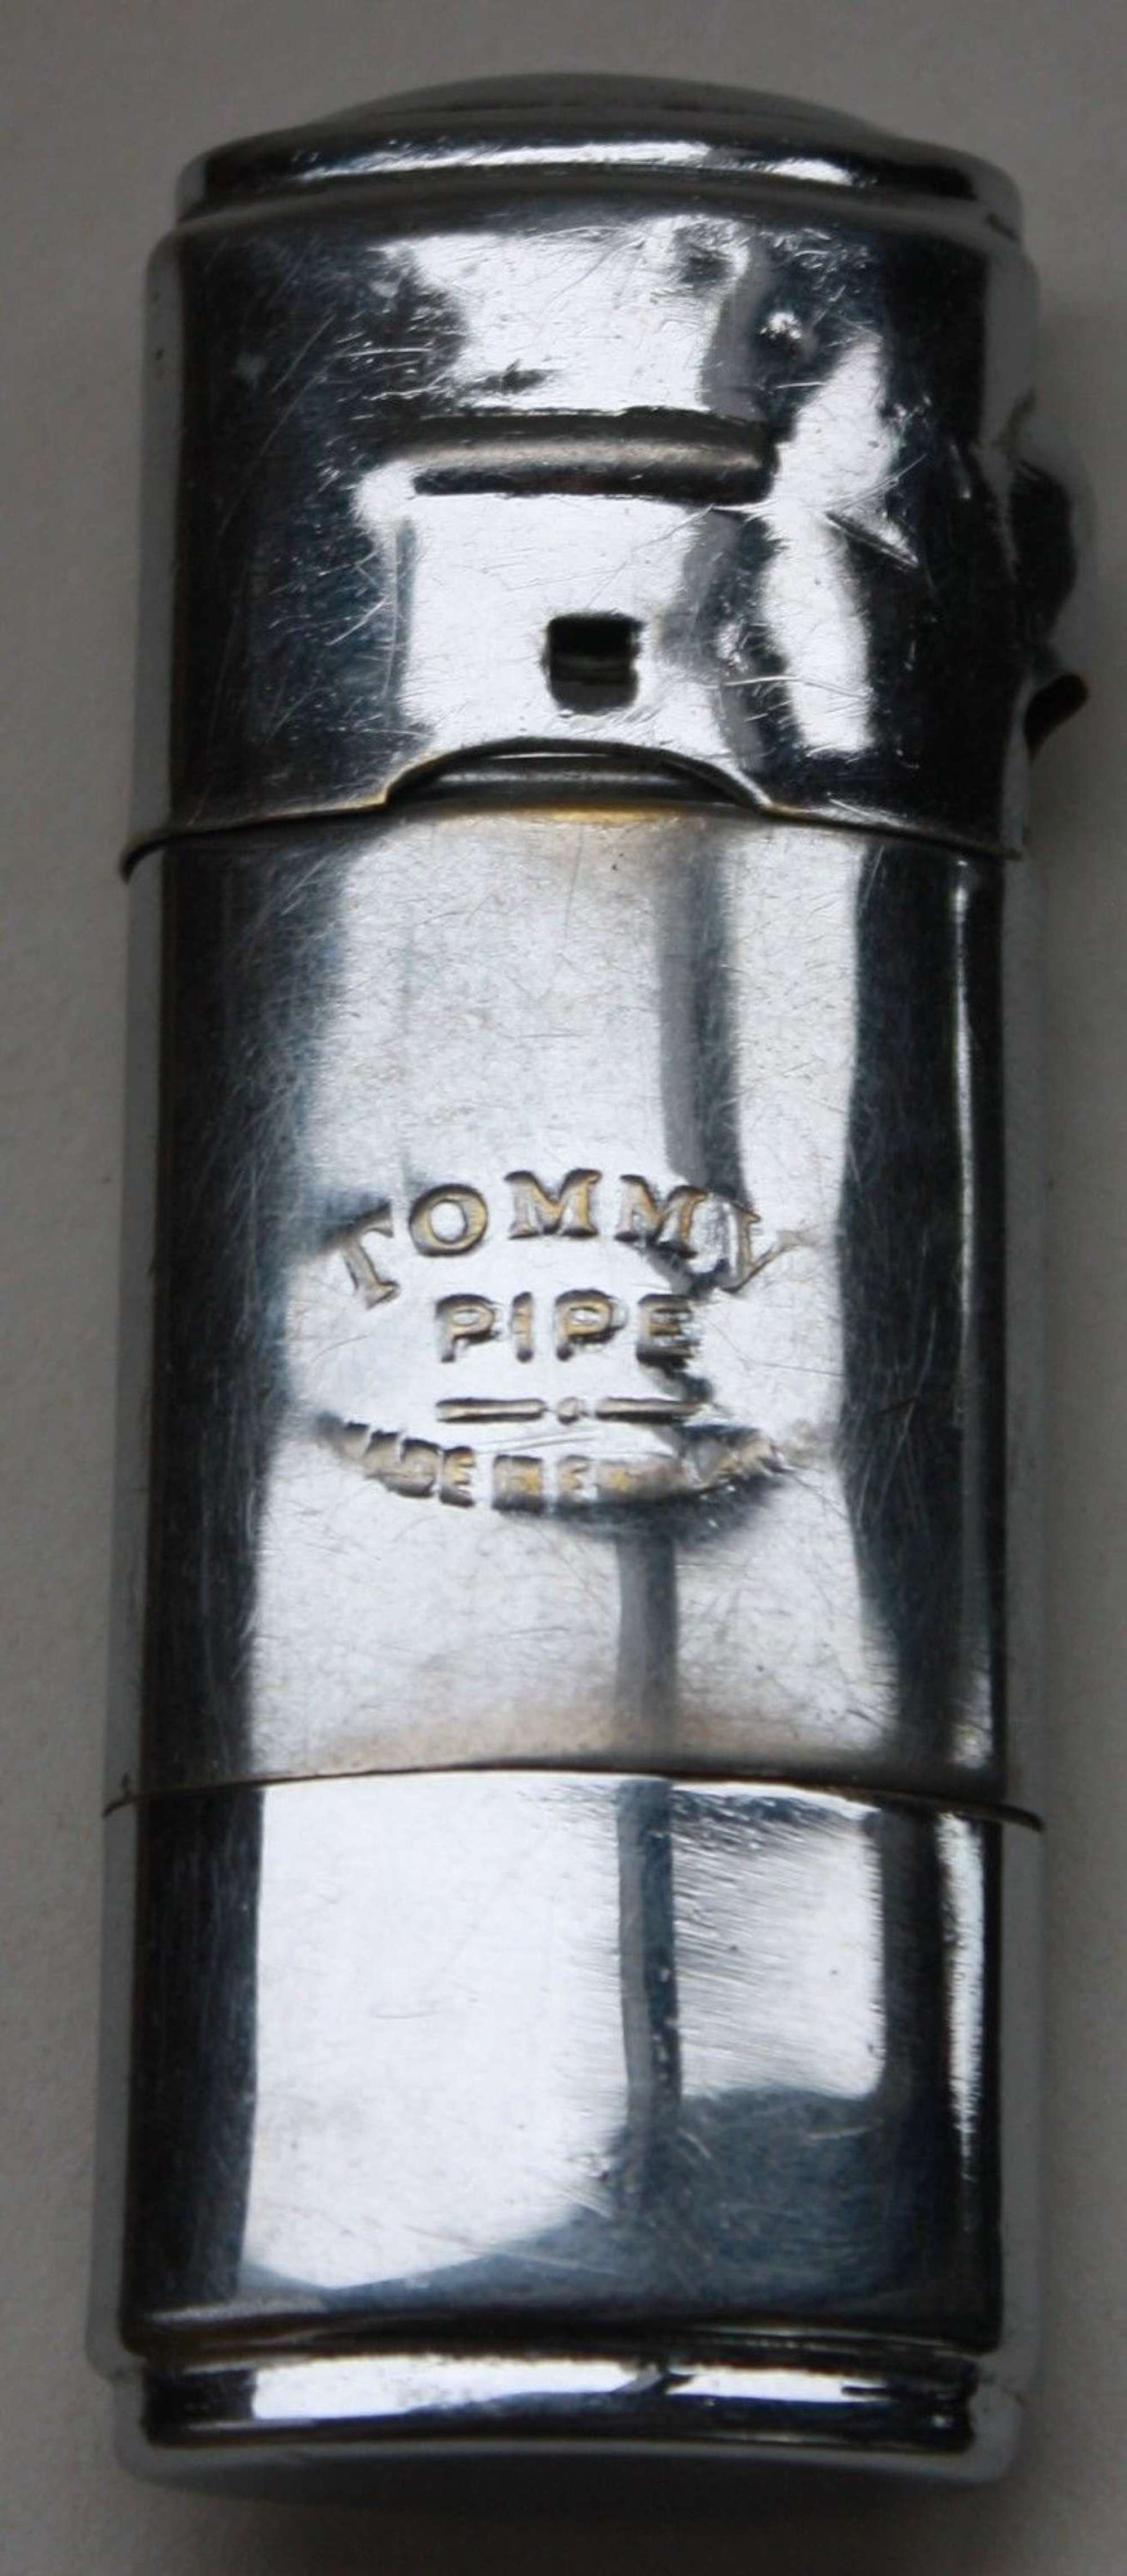 A RARE EXAMPLE OF THE WWII TOMMY PIPE LIGHTER